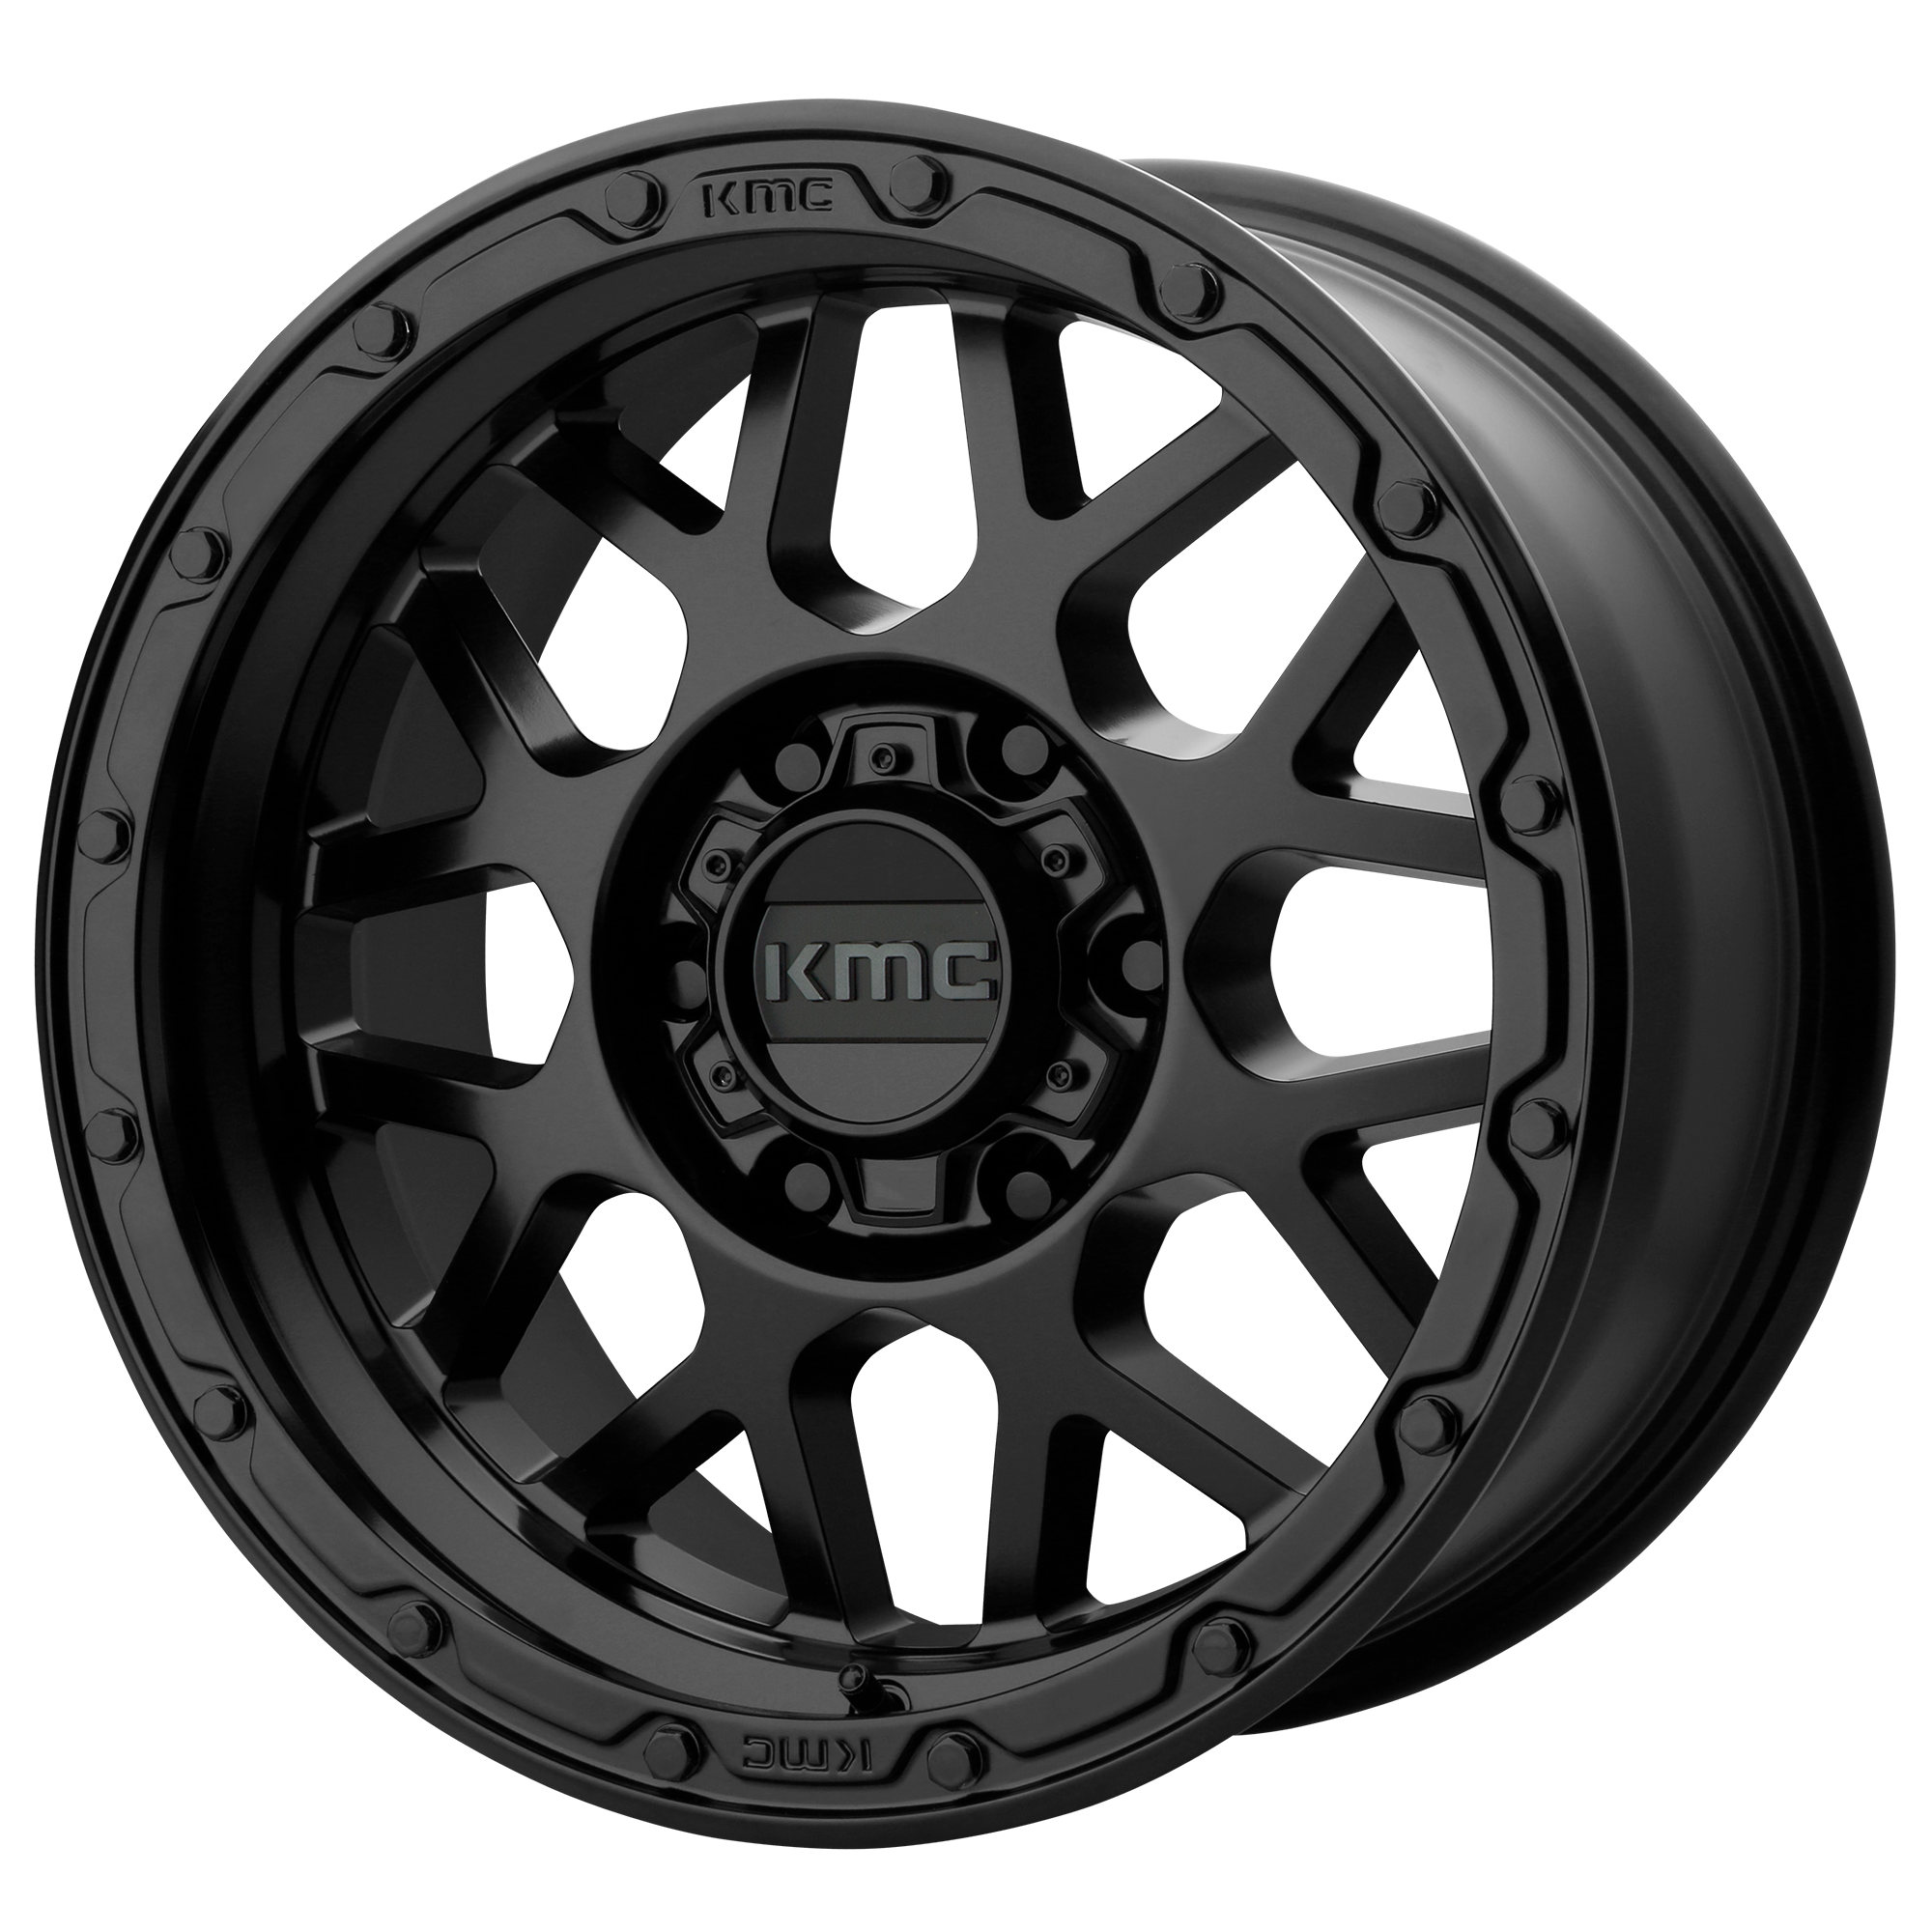 GRENADE OFF-ROAD 17x8.5 6x120.00 MATTE BLACK (0 mm) - Tires and Engine Performance